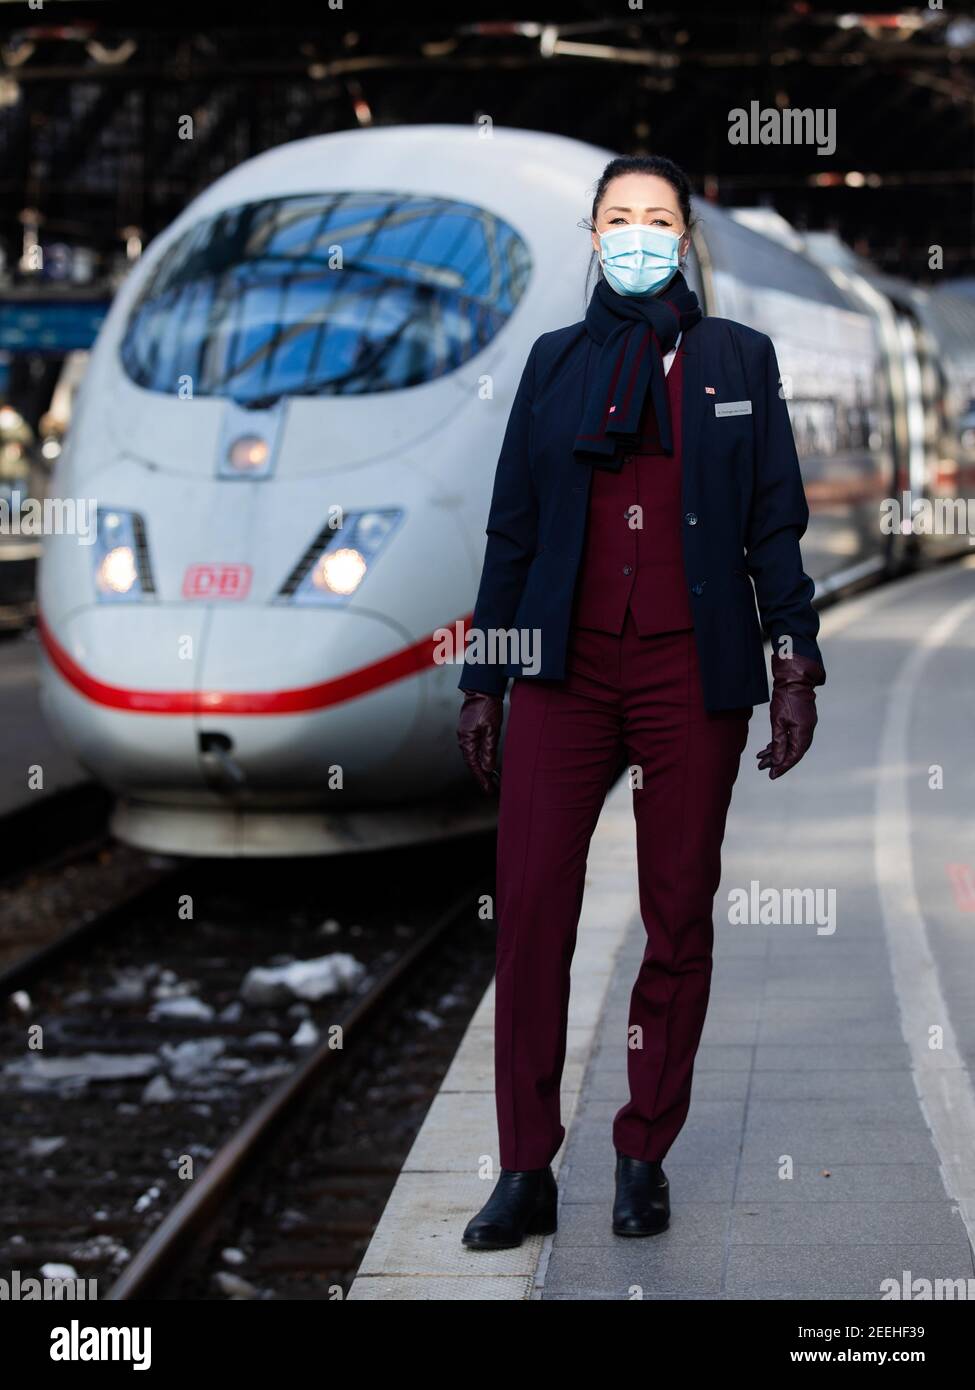 Cologne, Germany. 11th Feb, 2021. Nadine Perlinger dos Santos, former stewardess at Lufthansa subsidiary Germanwings and now a Deutsche Bahn train attendant, stands in front of an ICE train. Job prospects for pilots, flight attendants and aircraft technicians have deteriorated massively in the Corona crisis. In the reorientation, a state-owned company apparently offers advantages. (to dpa 'From the jet to the ICE - Flying personnel highly welcome at Bahn') Credit: Rolf Vennenbernd/dpa/Alamy Live News Stock Photo